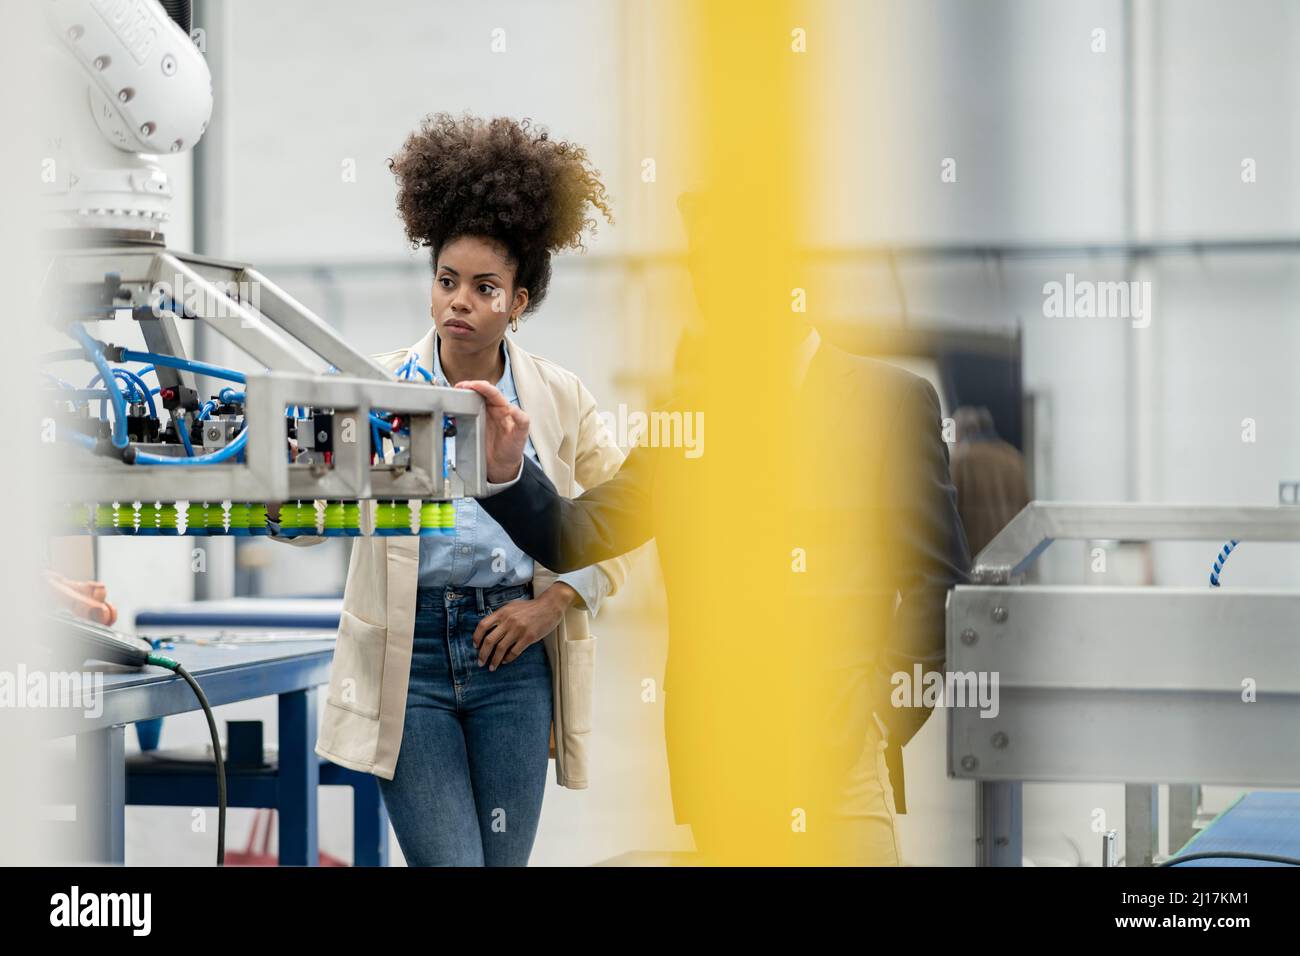 Developers analyzing machine in factory Stock Photo